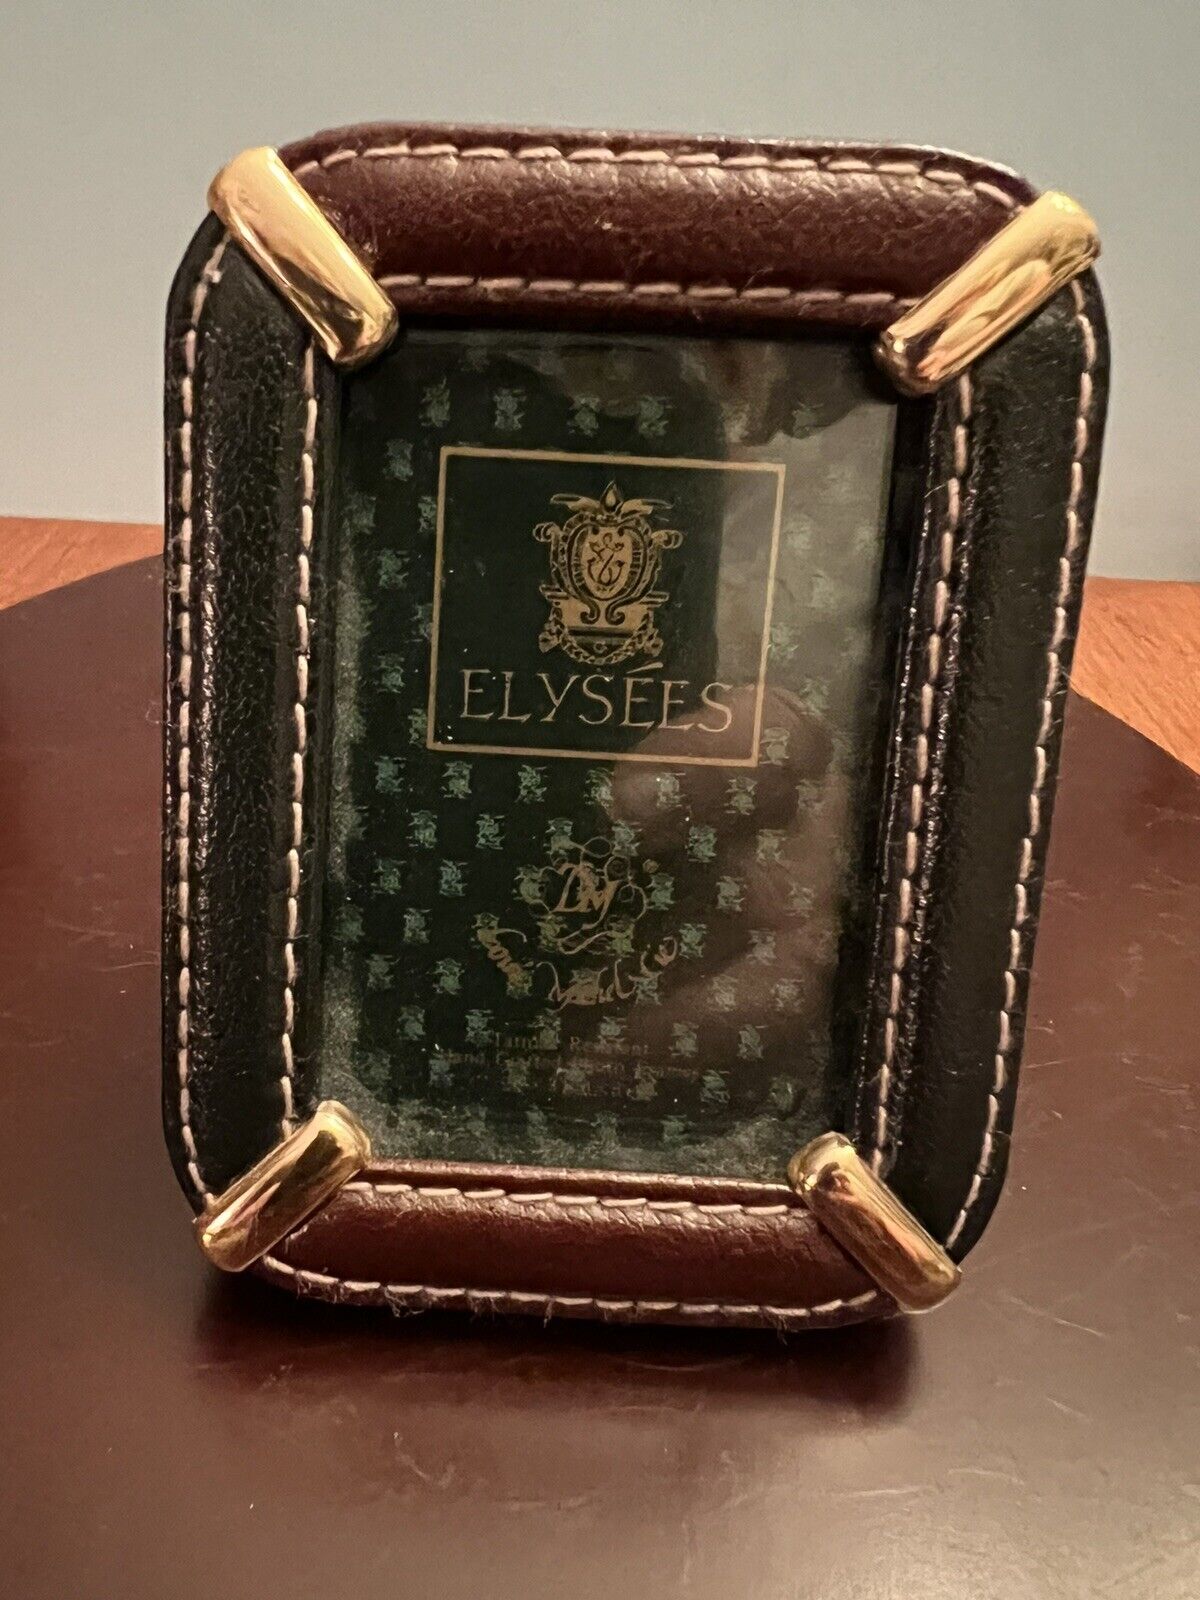 Elysees Small Leather Picture Frame 2” X 3”